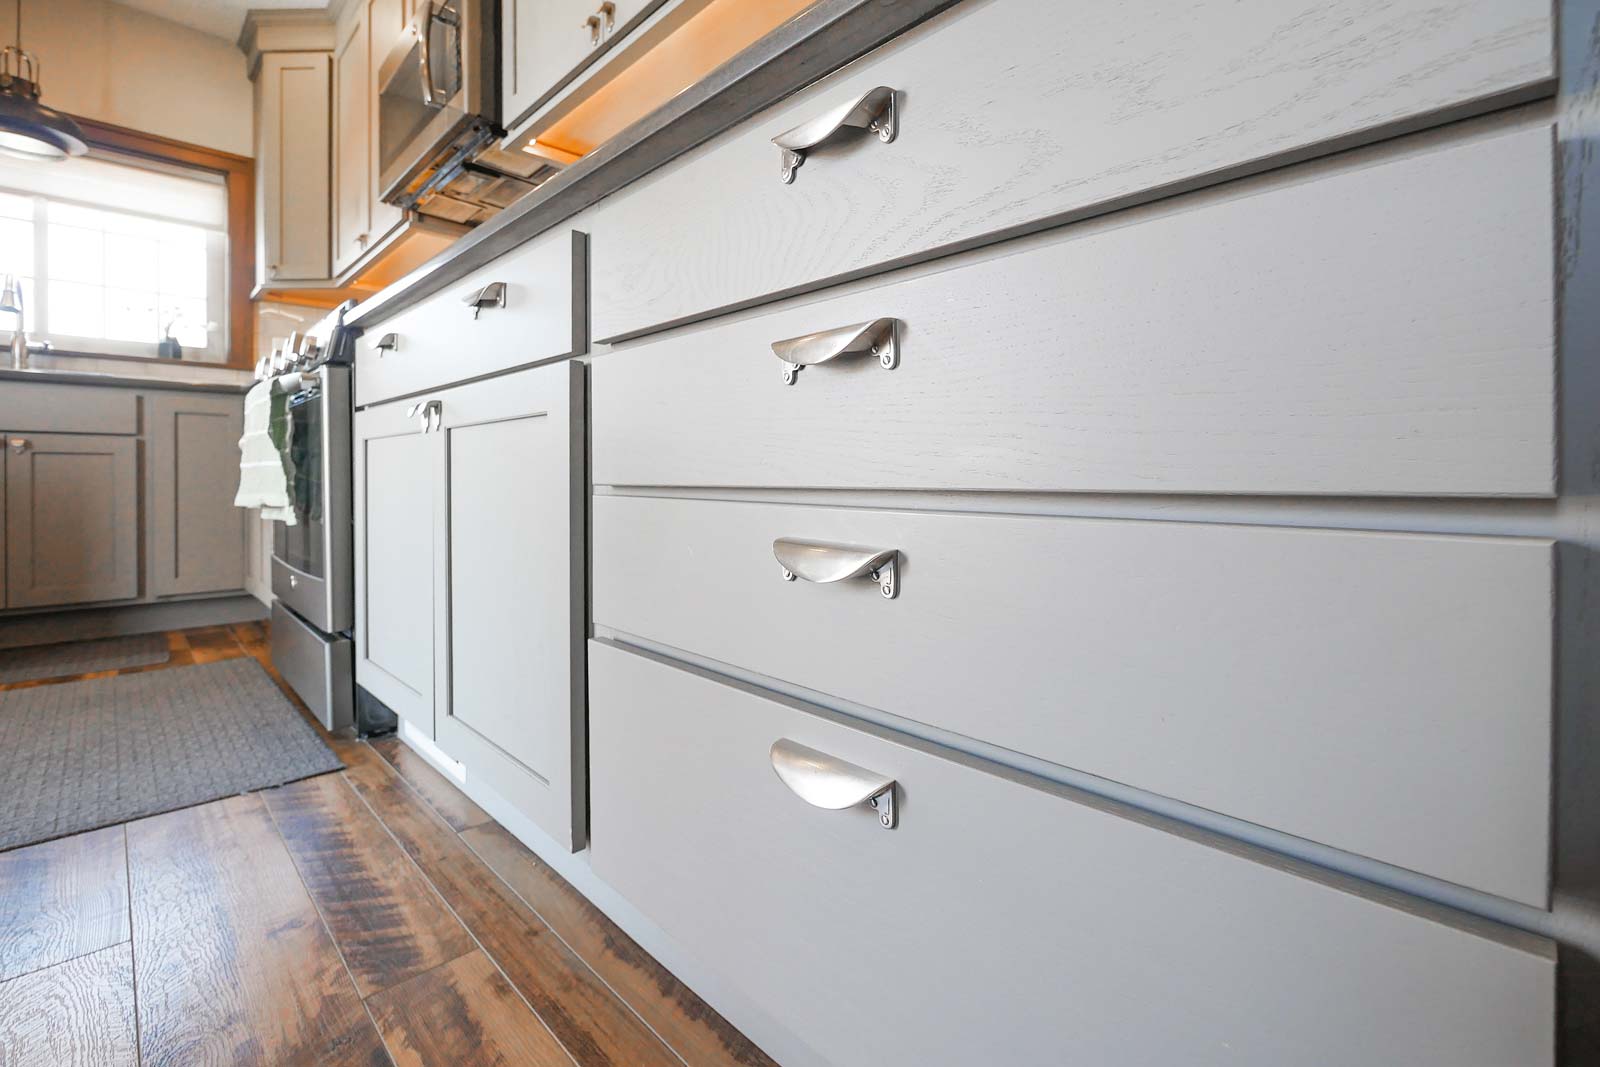 Grey kitchen cabinets with metal handles.